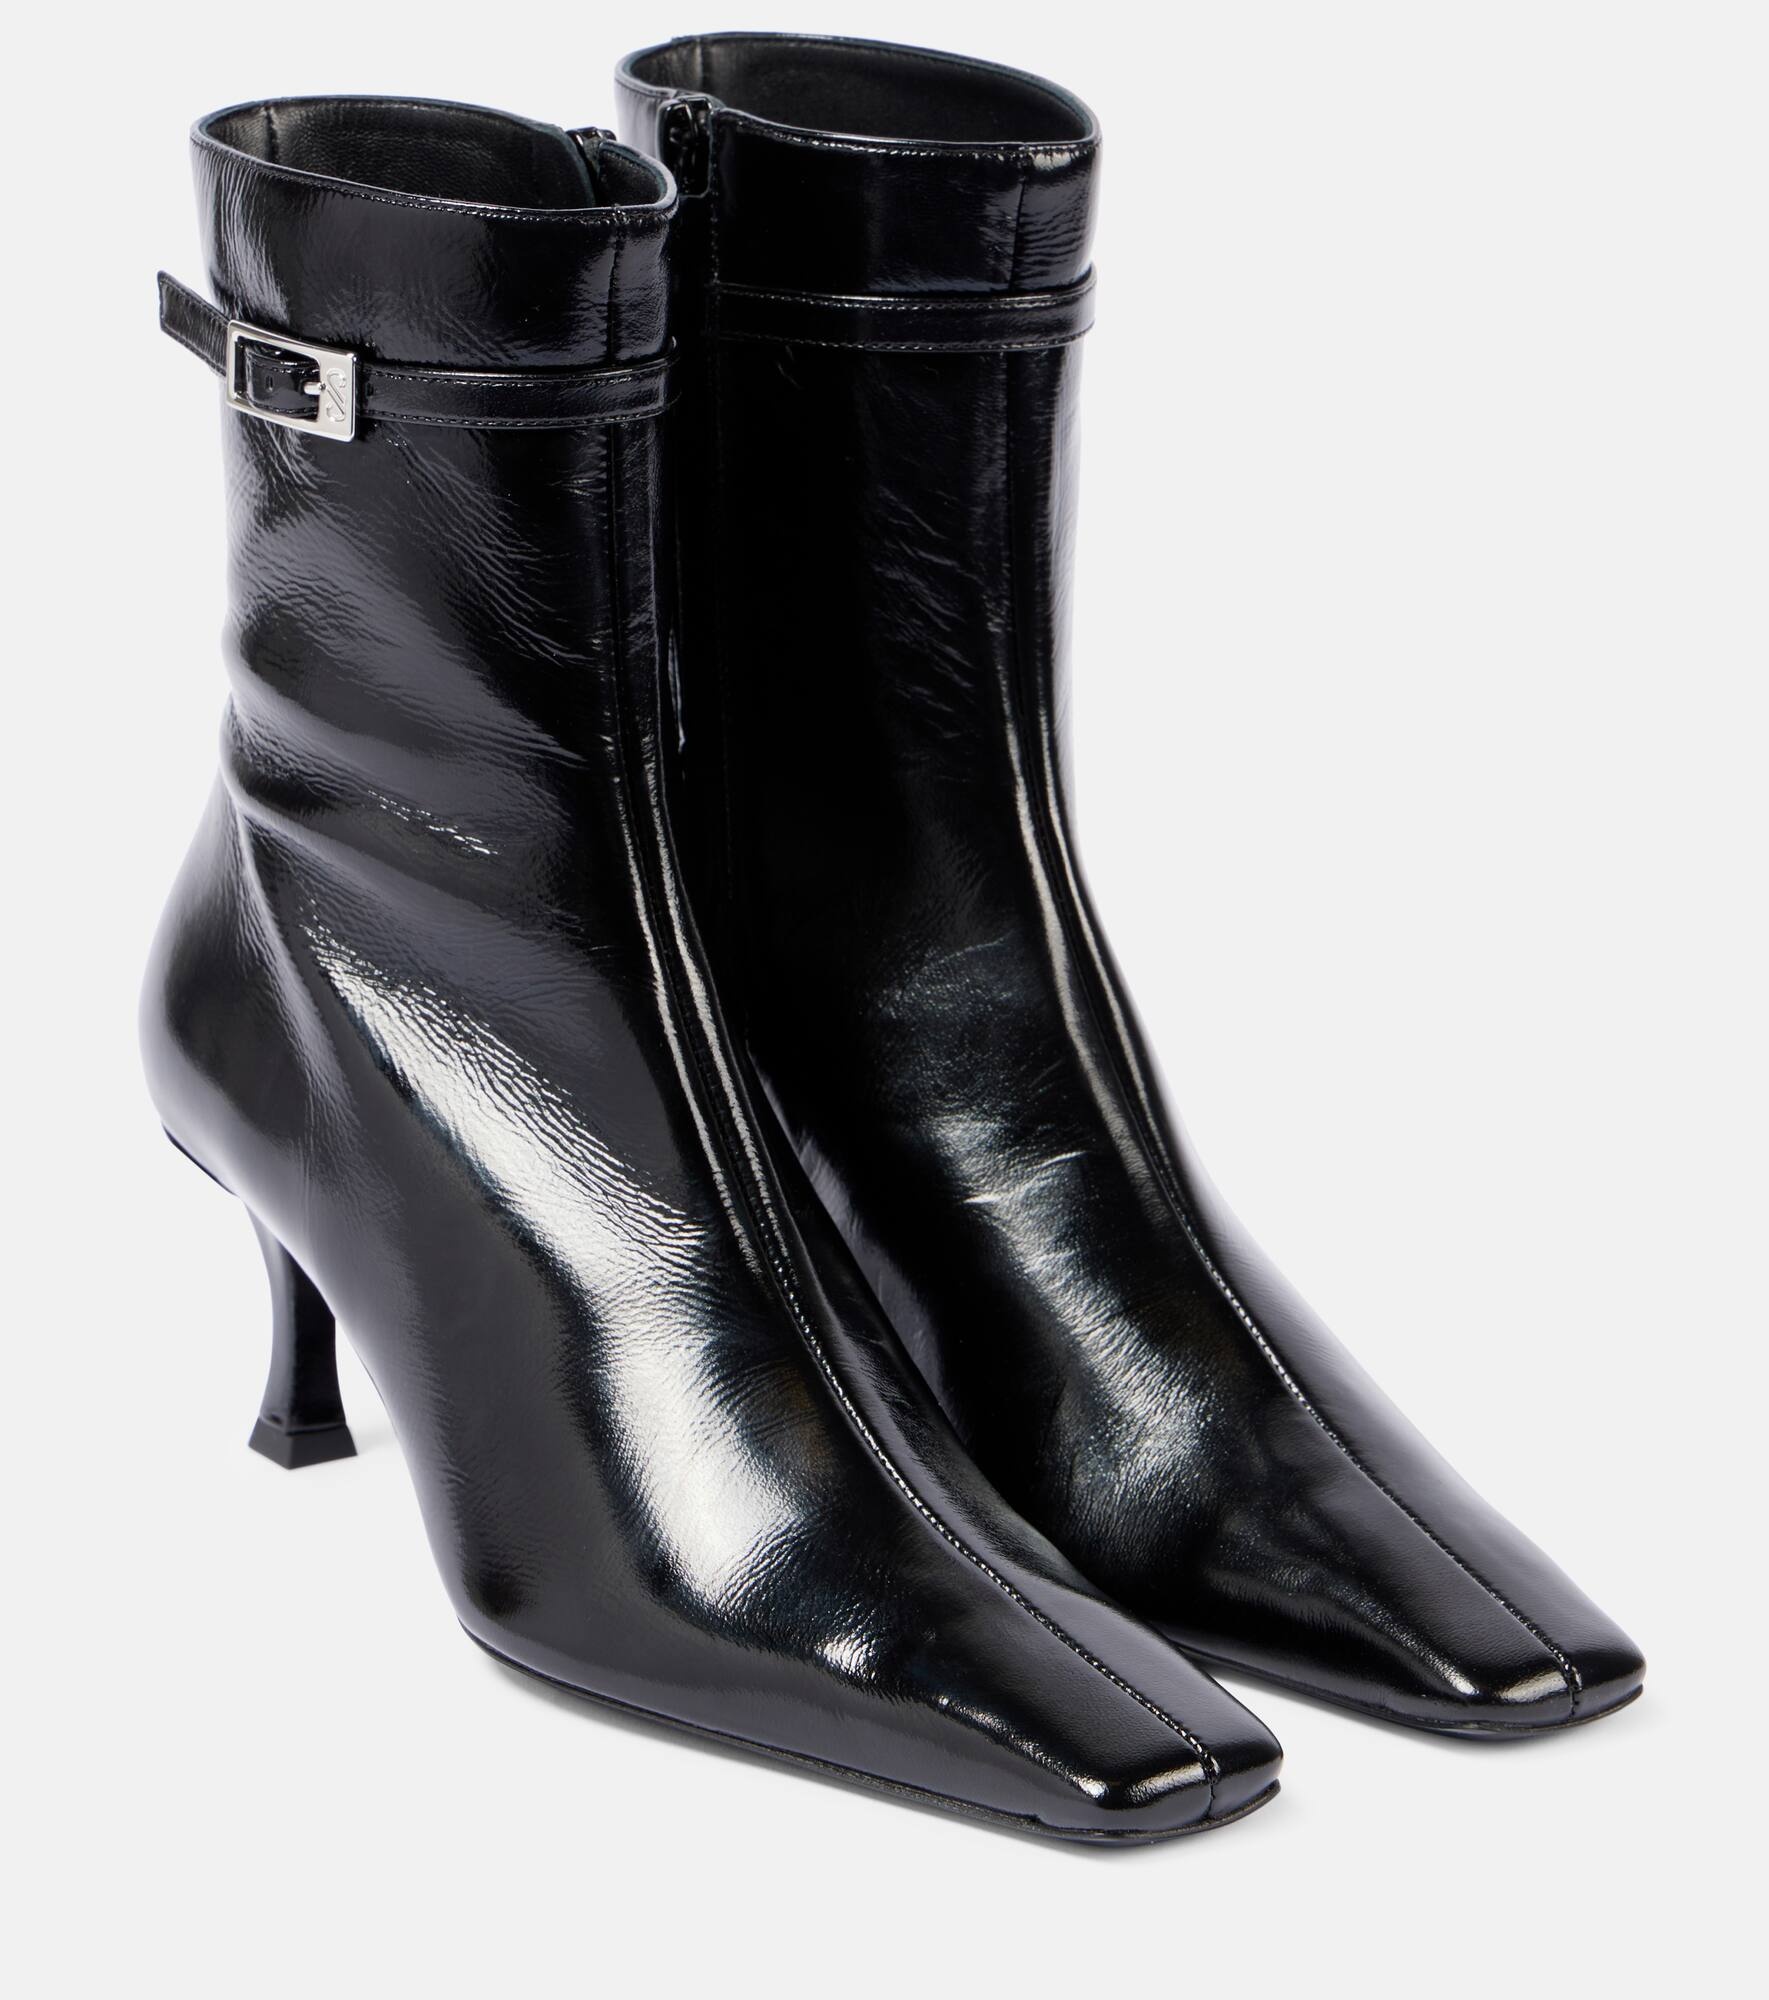 60 leather ankle boots - 1